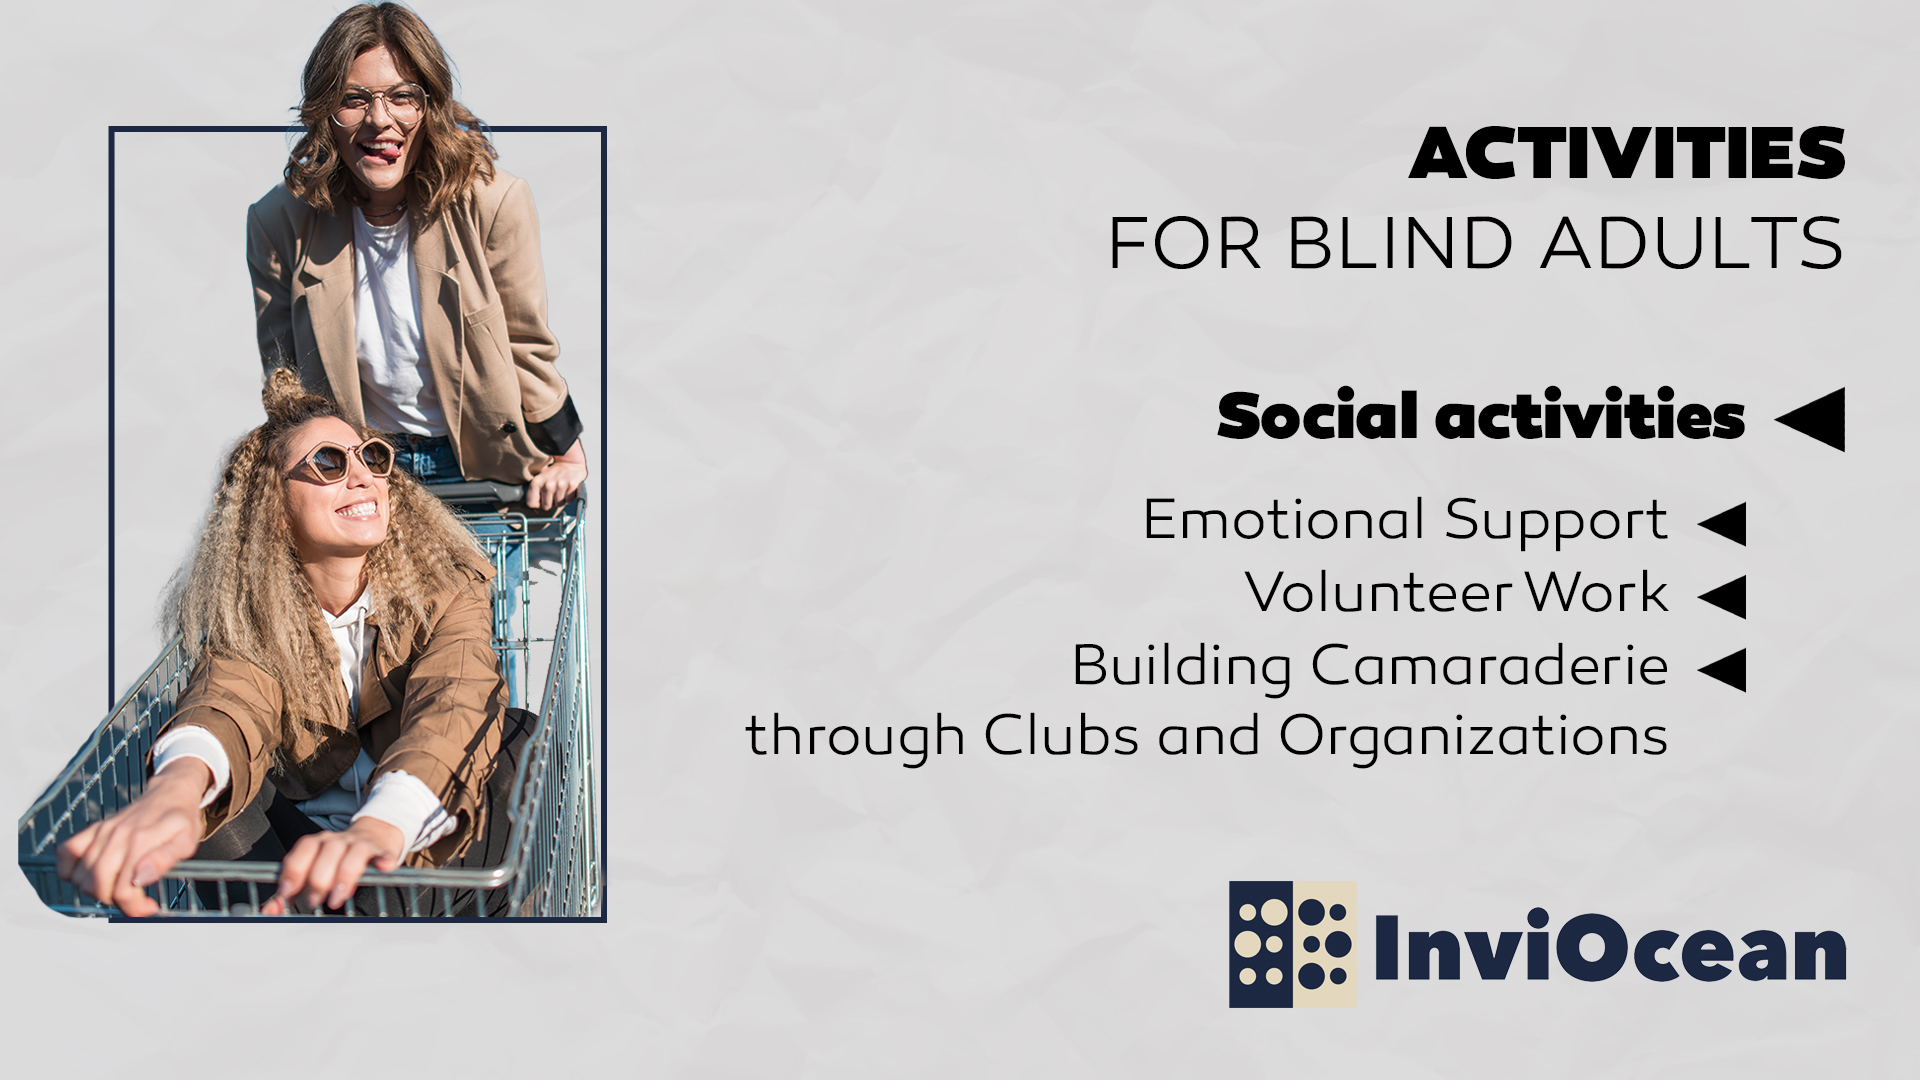 Social activities for the blind